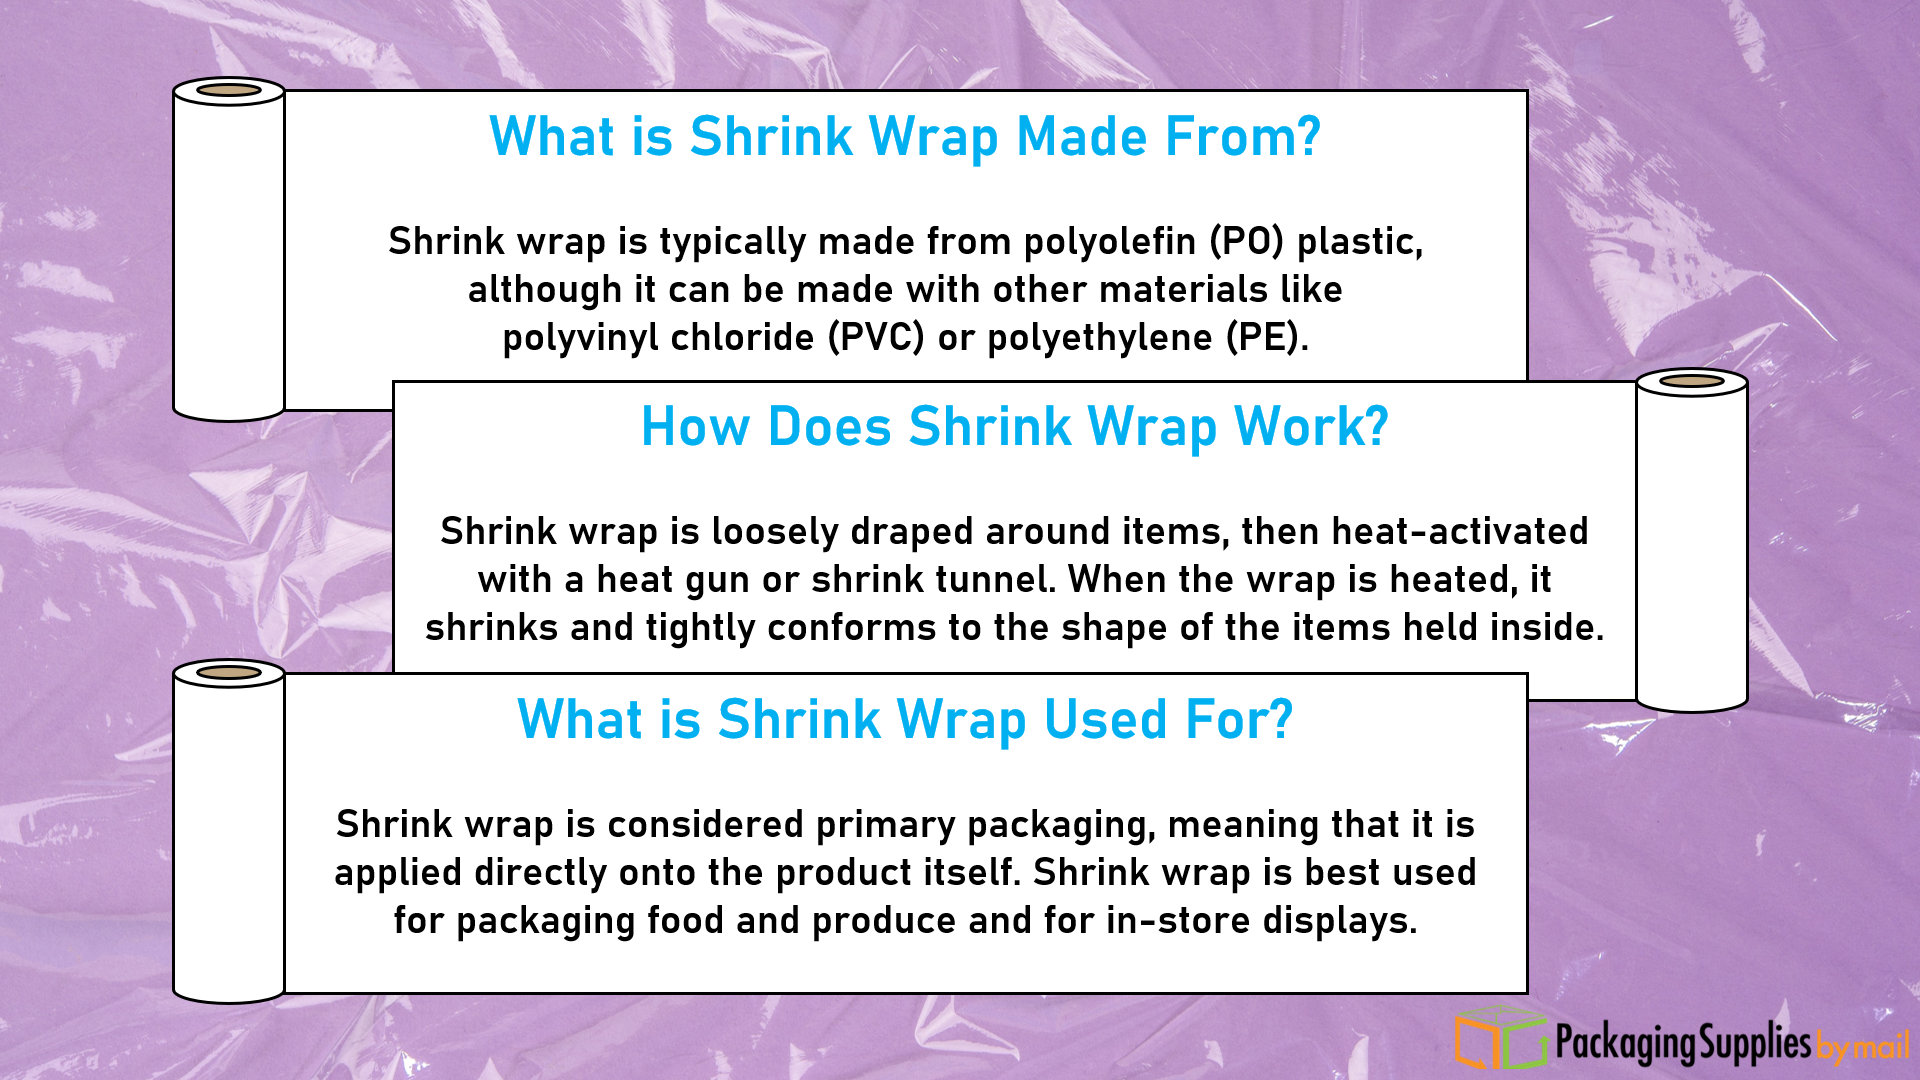 What is Shrink Wrap?